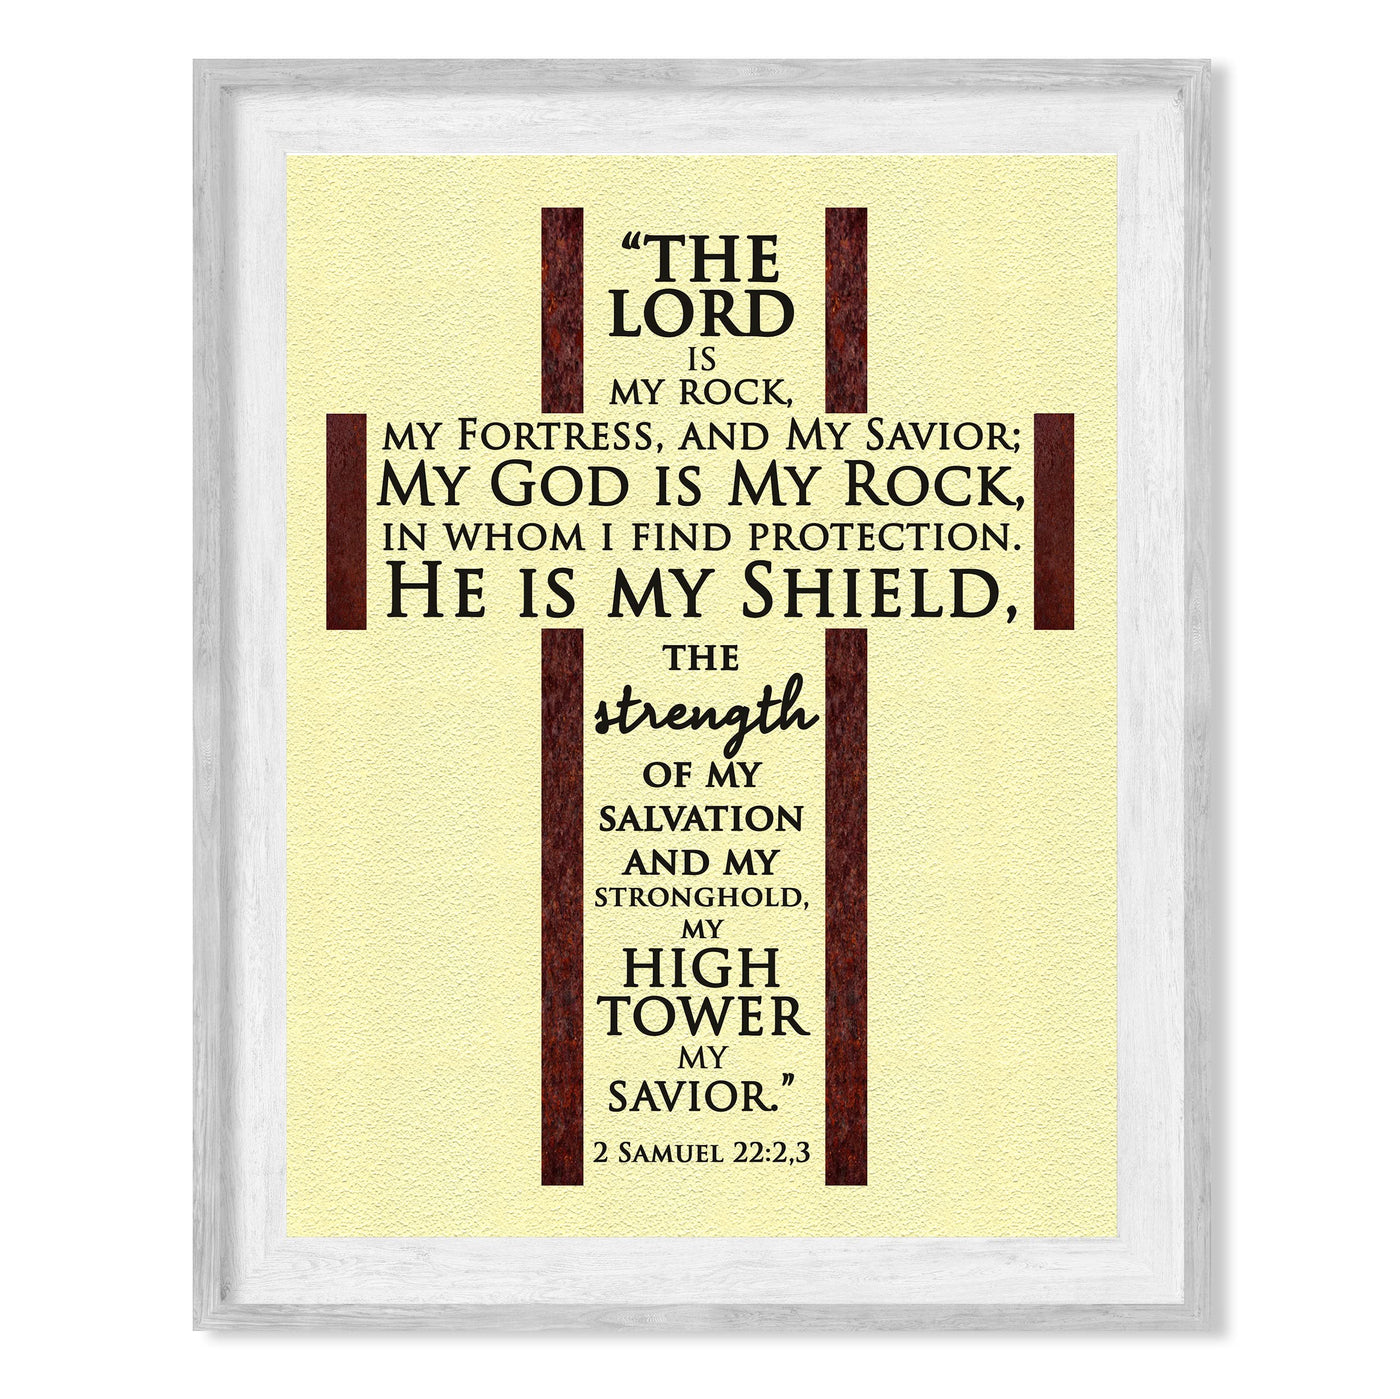 The Lord Is My Rock, My Savior-Bible Verse Wall Art -8 x 10" Rugged Cross Word Art -Scripture Wall Print-Ready to Frame. Home-Office-Church-Religious Decor. 2 Samuel 22:2-3. Perfect Christian Gift!